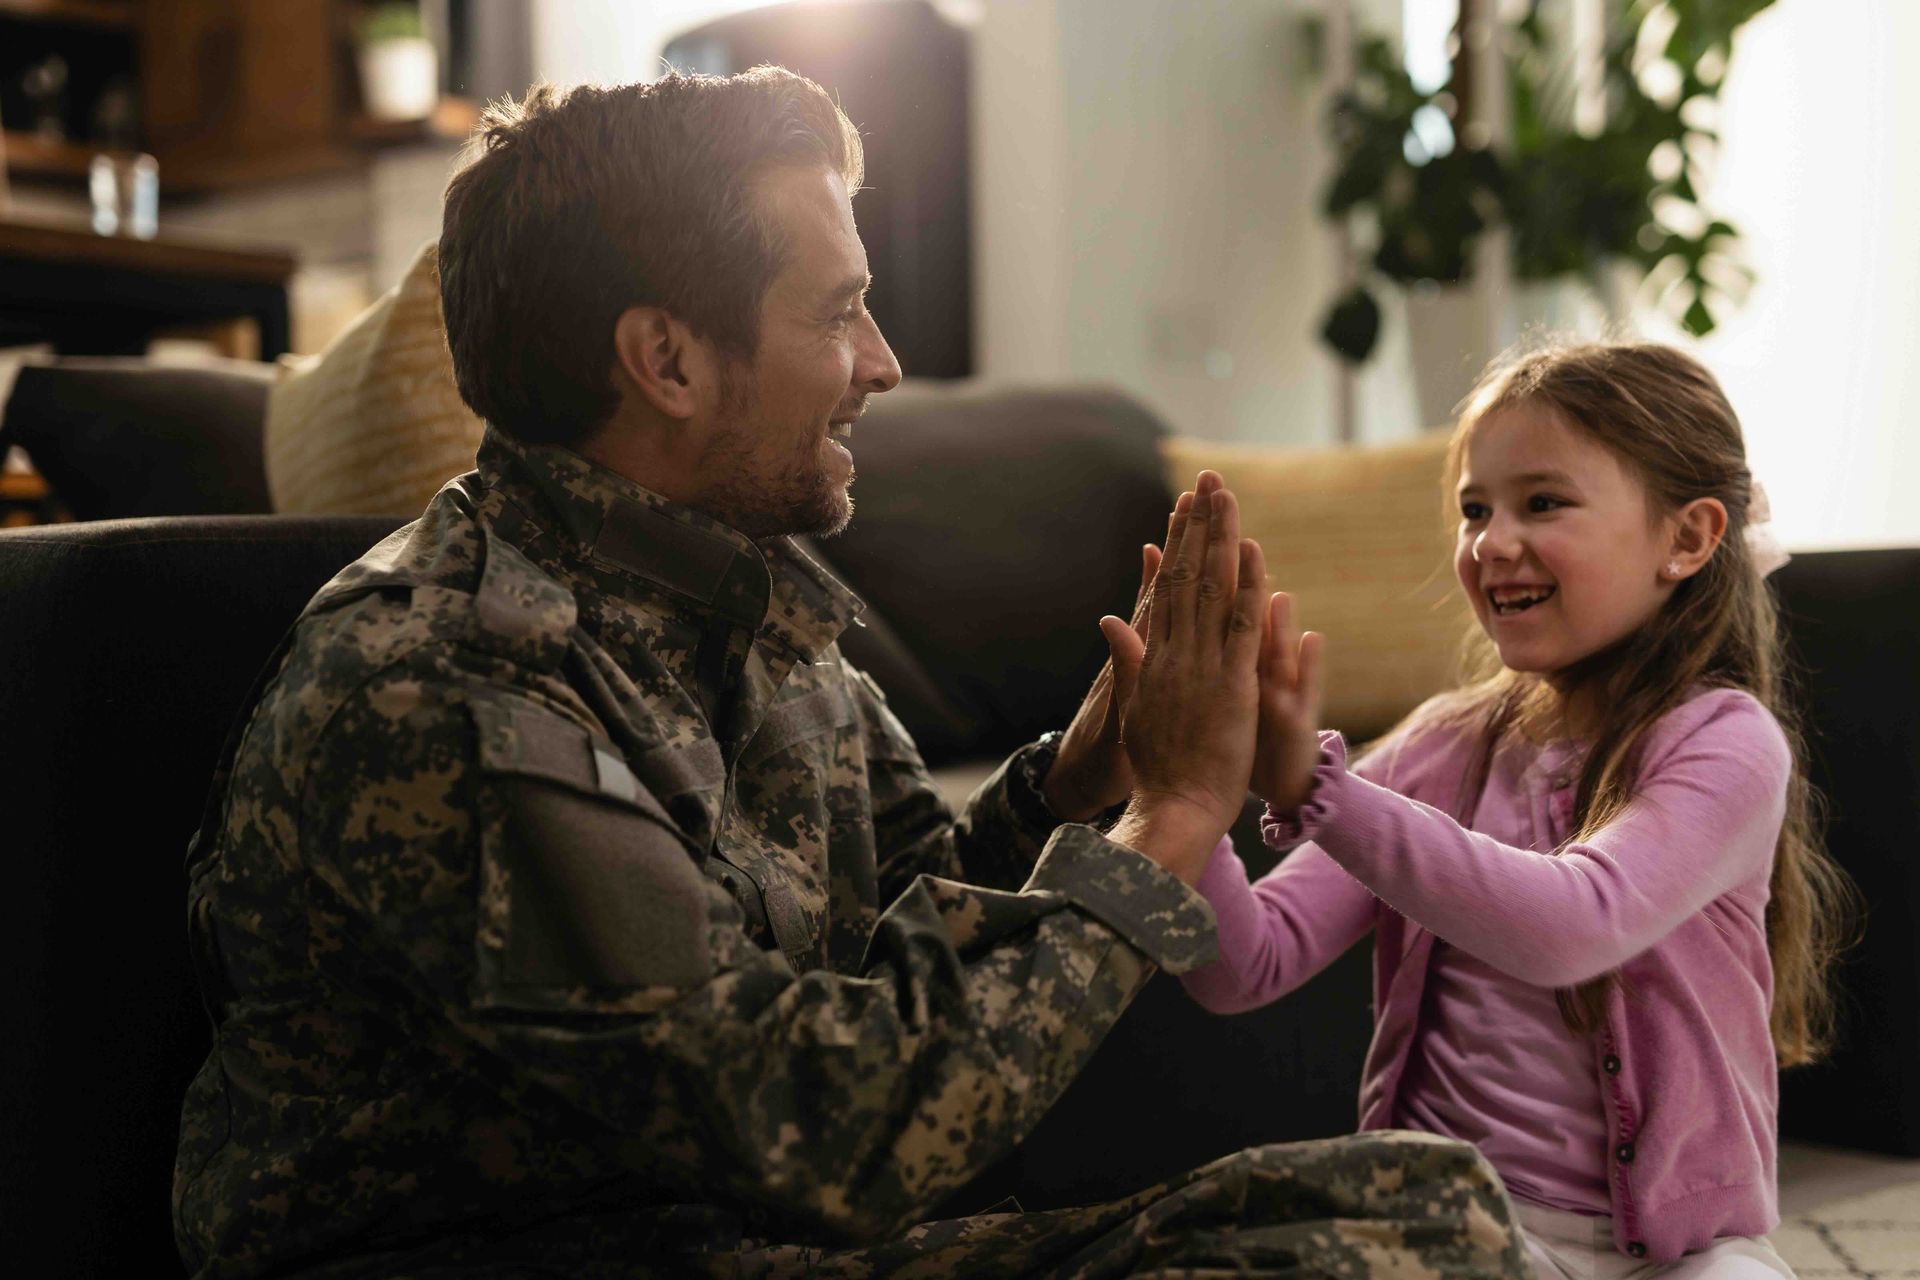 A man in a military uniform is giving a little girl a high five.